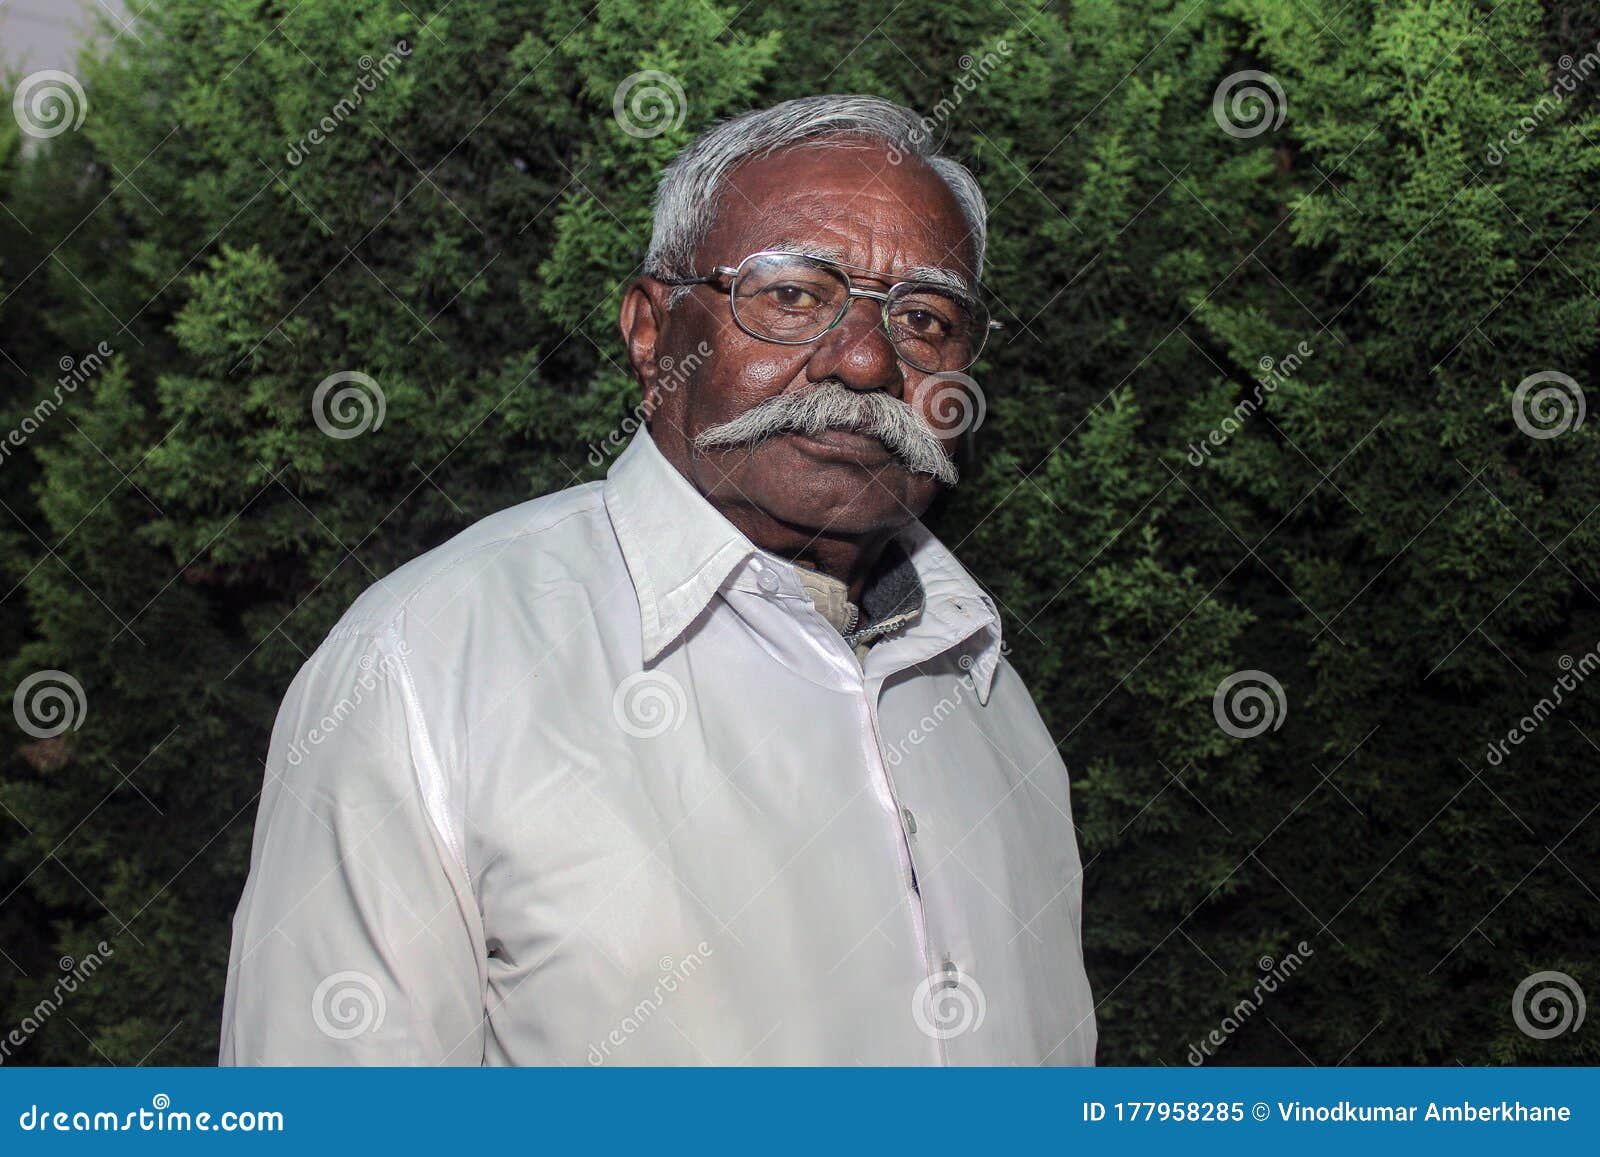 Old Indian Man Having White Mustache And Glasses Posing For Photo Stock Image Image Of Hairs